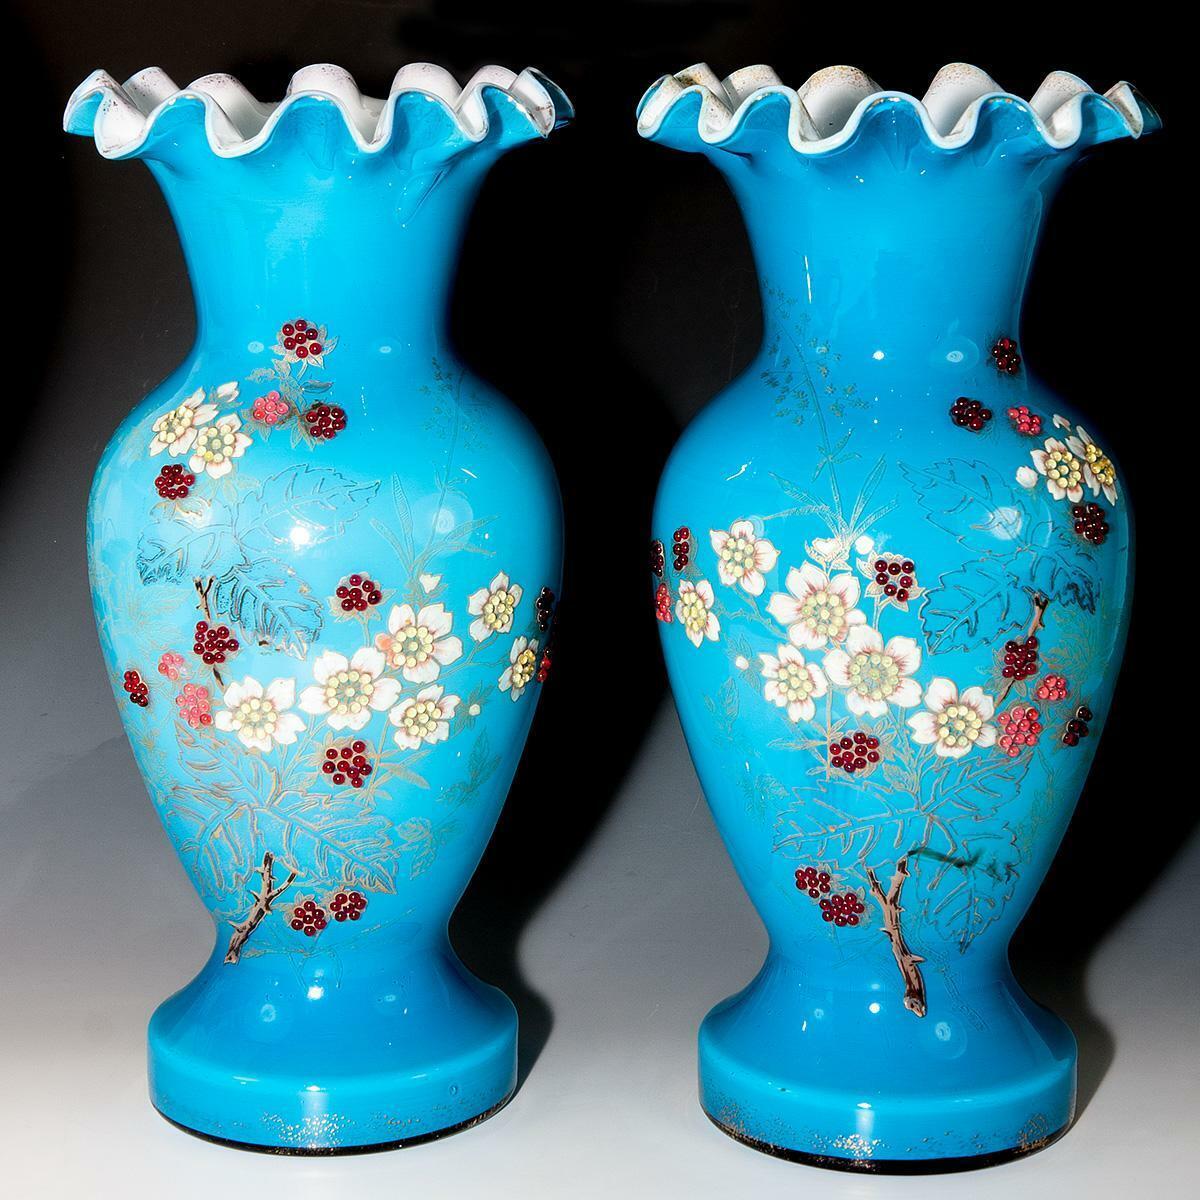 Rare HUGE 1800s Antique French Glass Vase PAIR (2), Bead Decorated Enamel